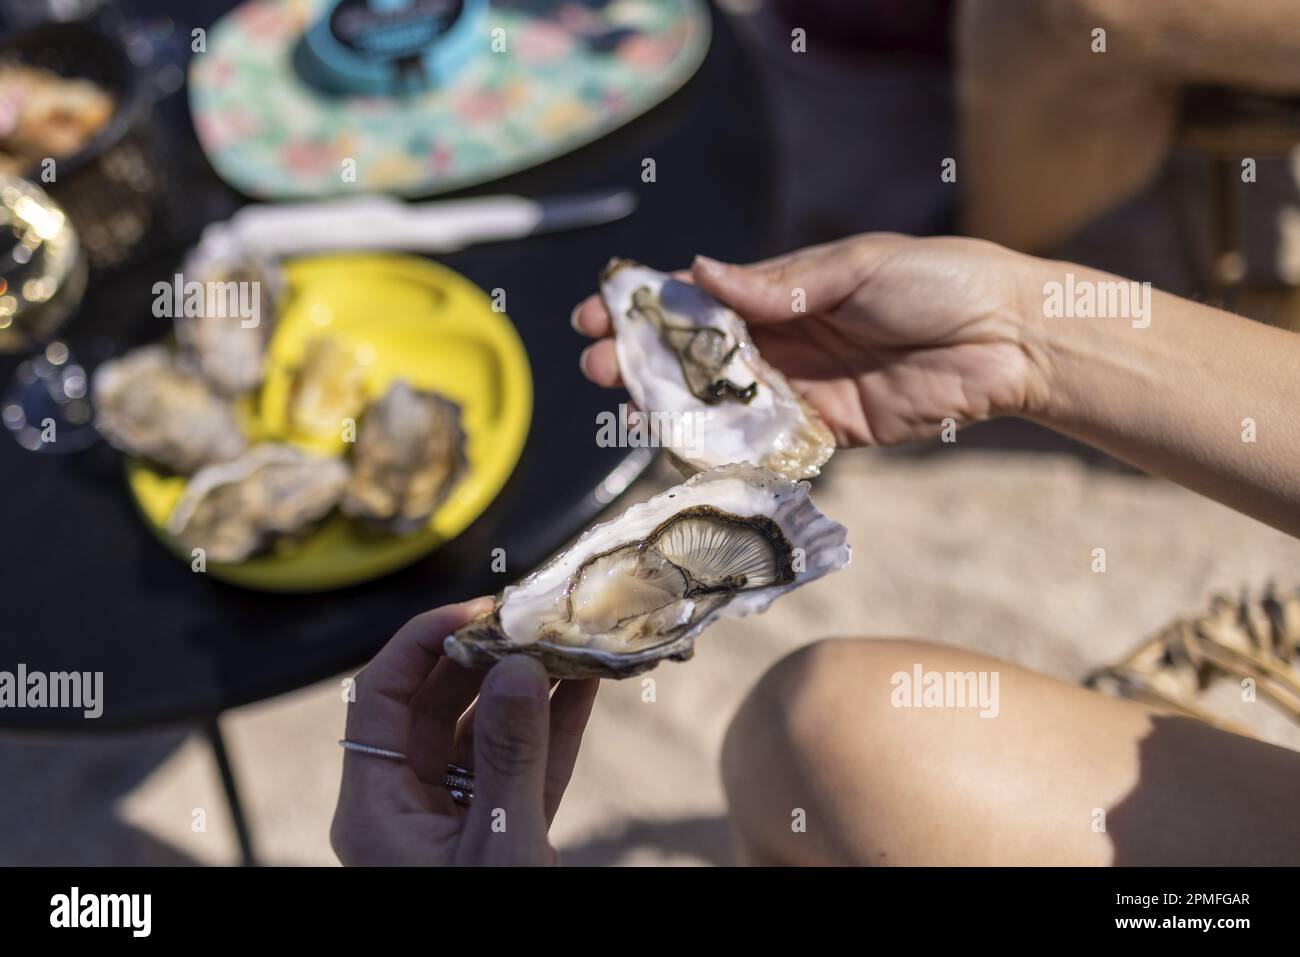 France, Cotes d'Armor, Paimpol, oyster tasting at Chez Arin oyster bar Stock Photo